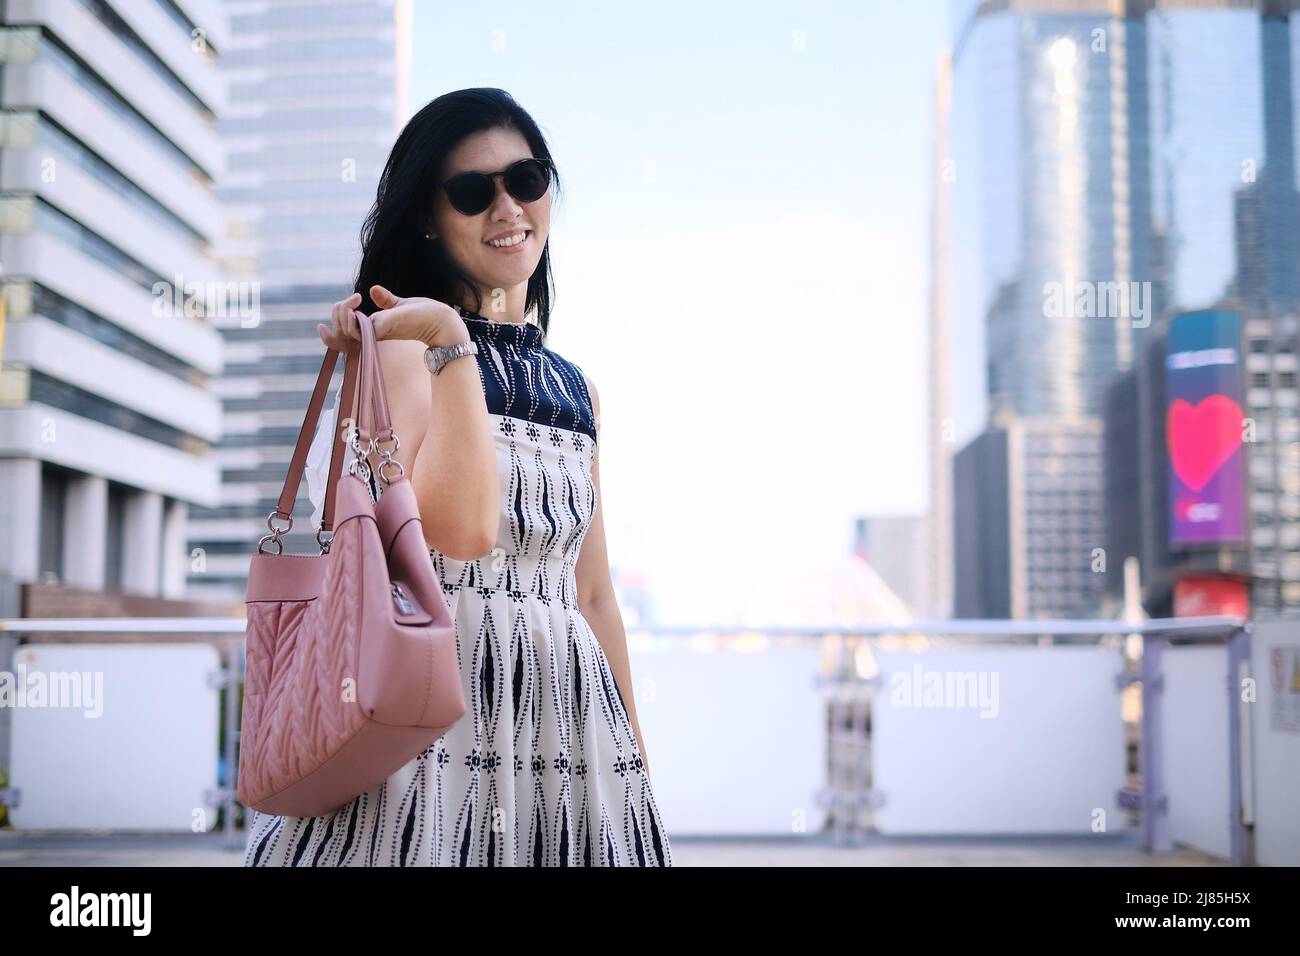 A beautiful confident Asian businesswoman in white and blue dress is holding her pink handbag, standing on an overpass walkway with the city skyline i Stock Photo